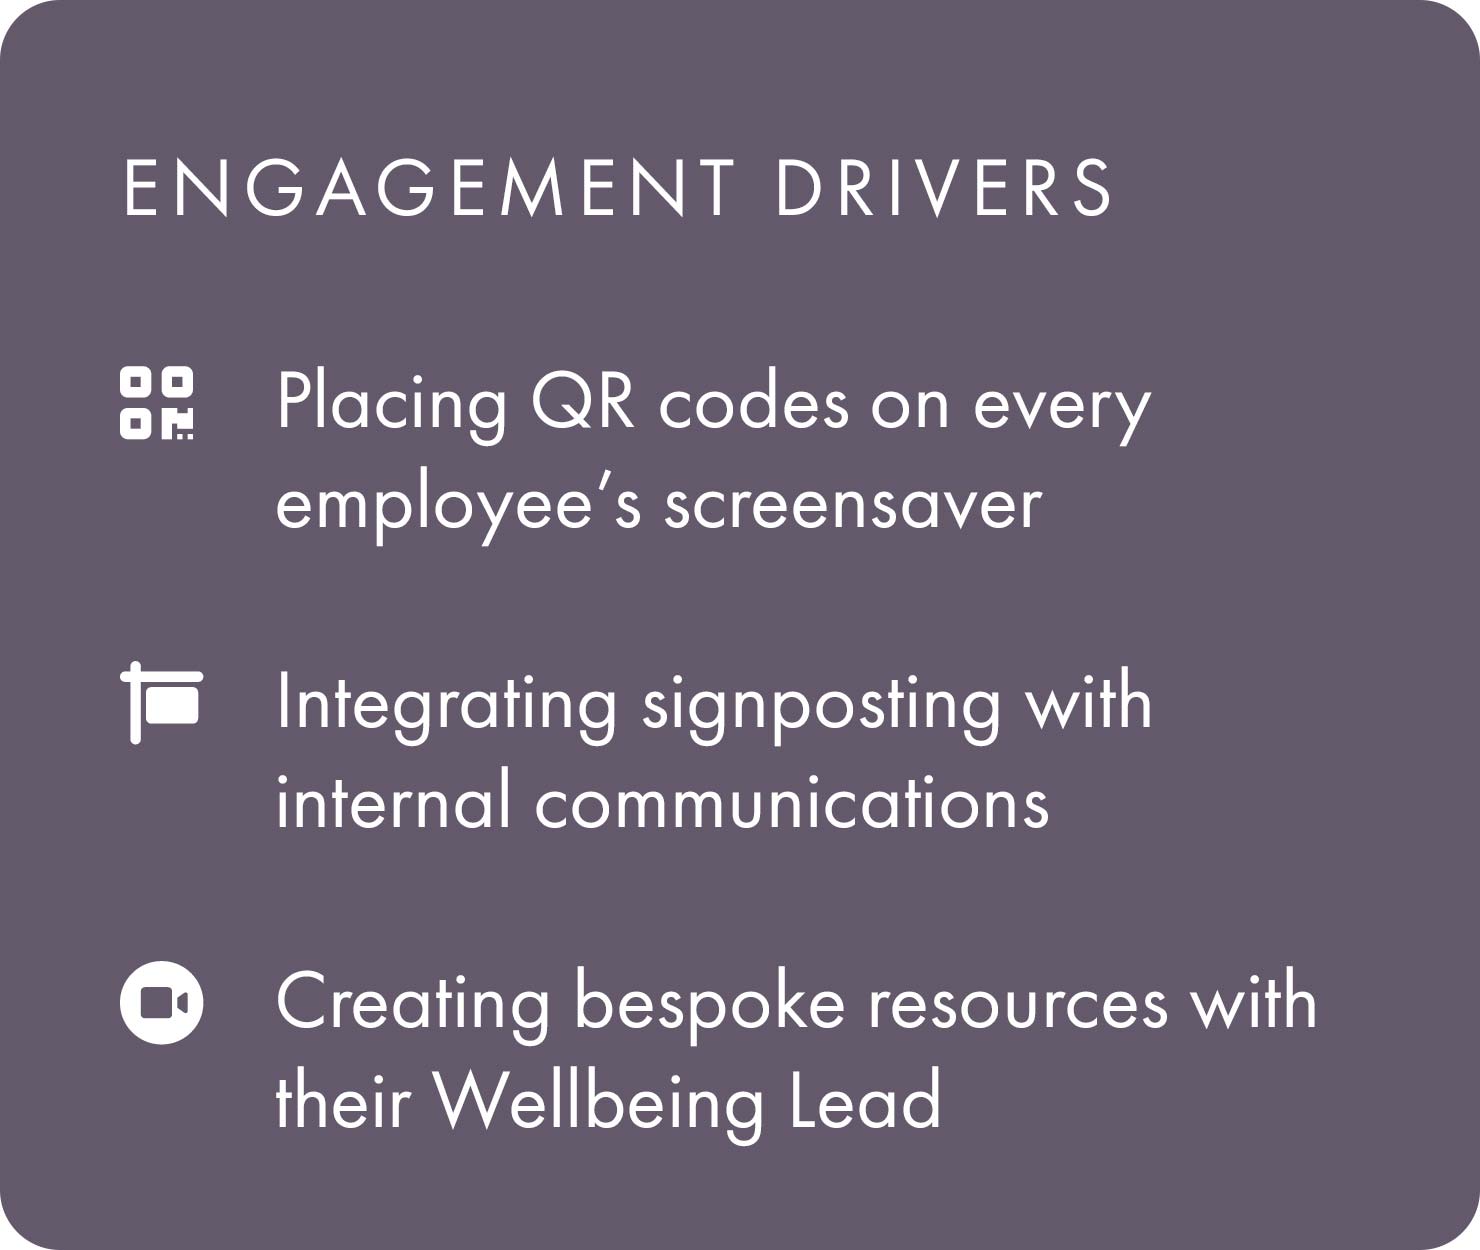 Placing QR codes on every employee’s screensaver Integrating signposting with internal communications Creating bespoke resources with their Wellbeing Lead